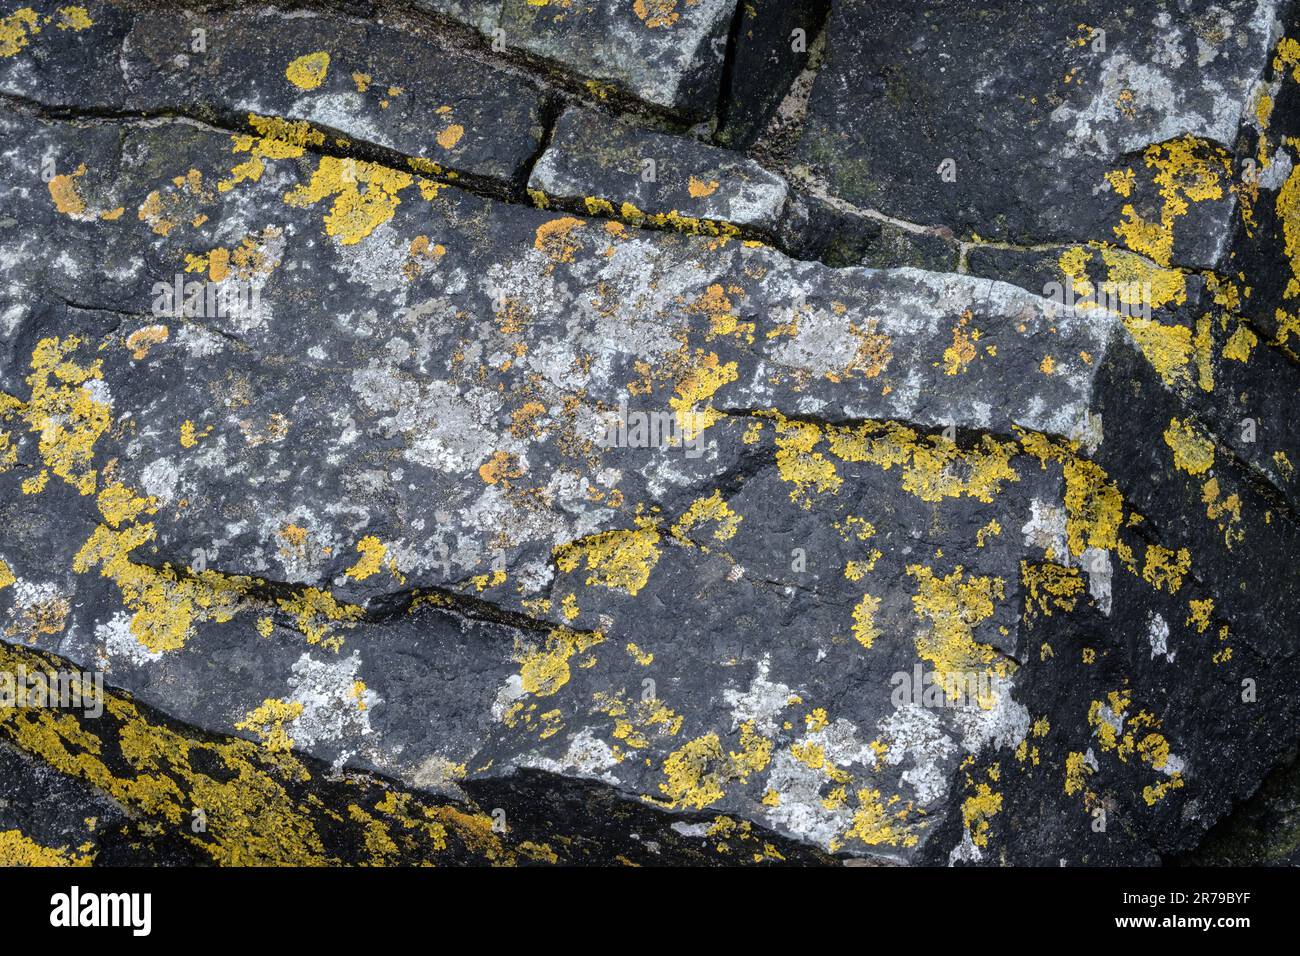 Detail of flat large rocks with yellow and white mould. Marazion Beach, Cornwall, England, UK. Stock Photo